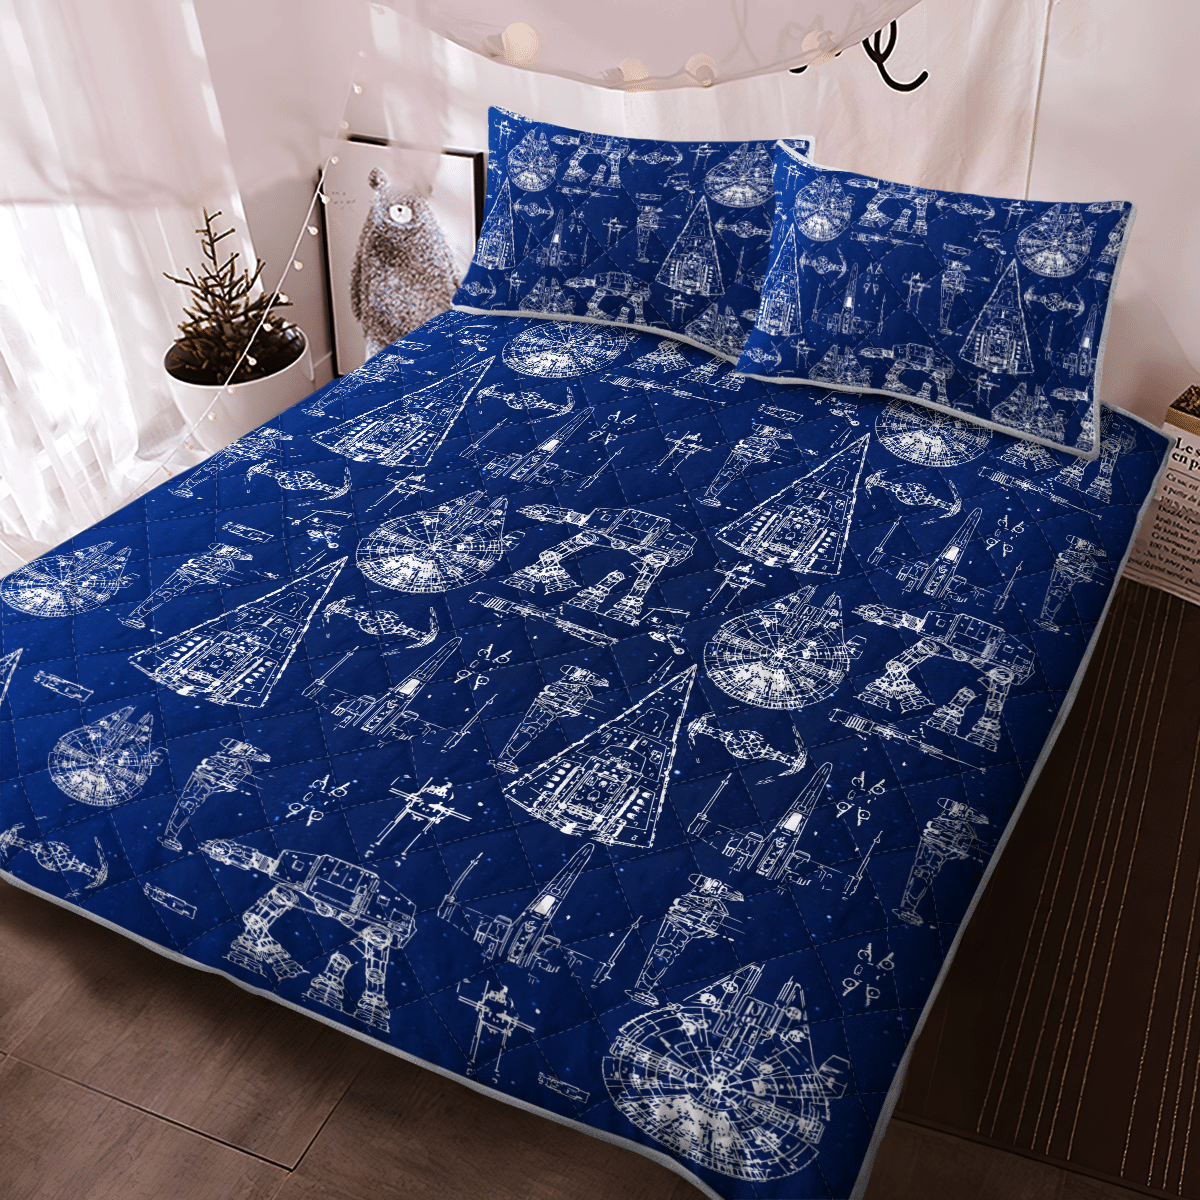 SW Space Ships Quilt - Bedding Set